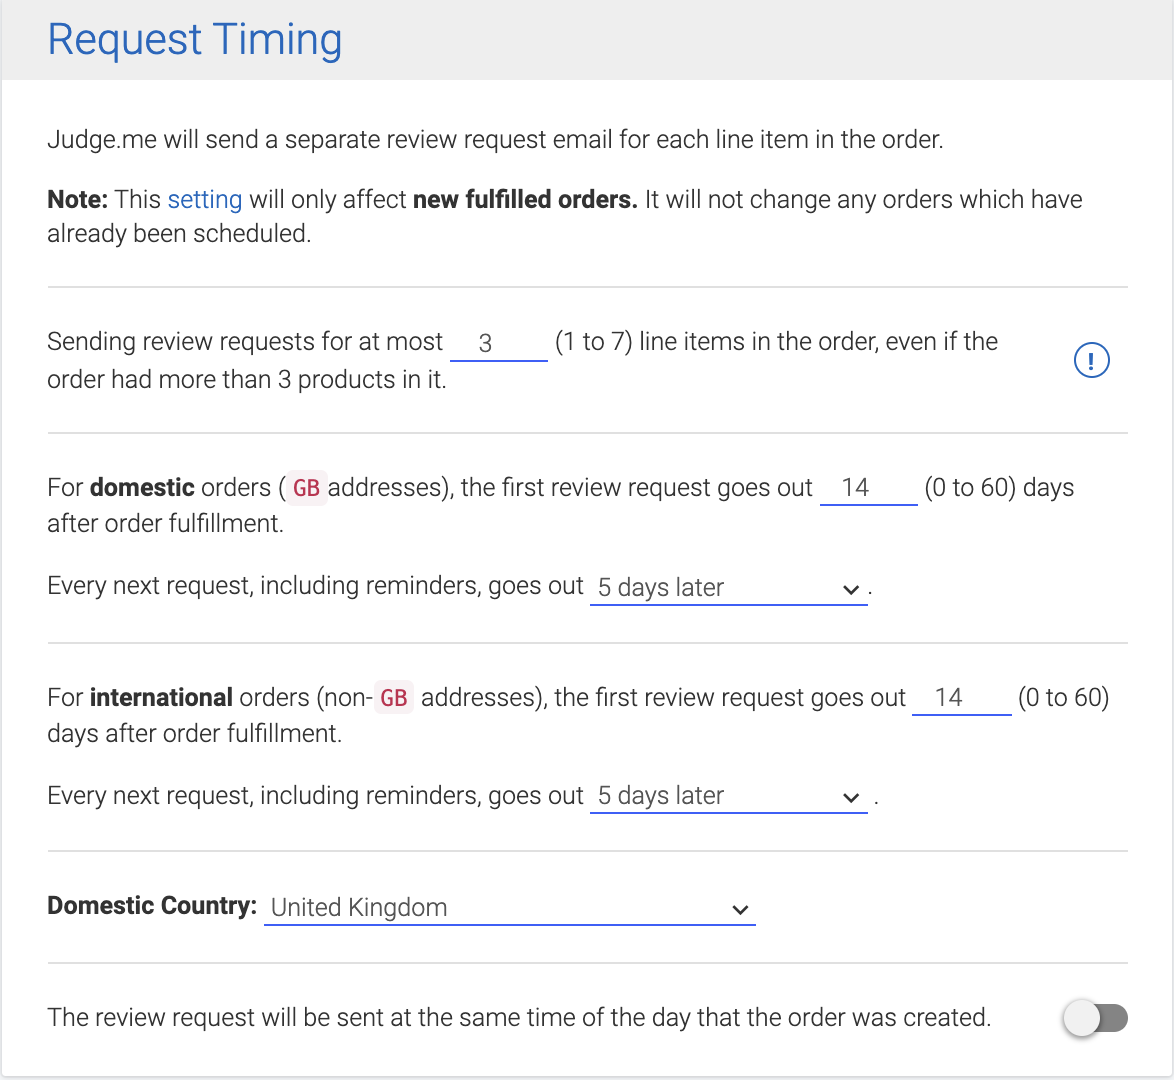 Request timing